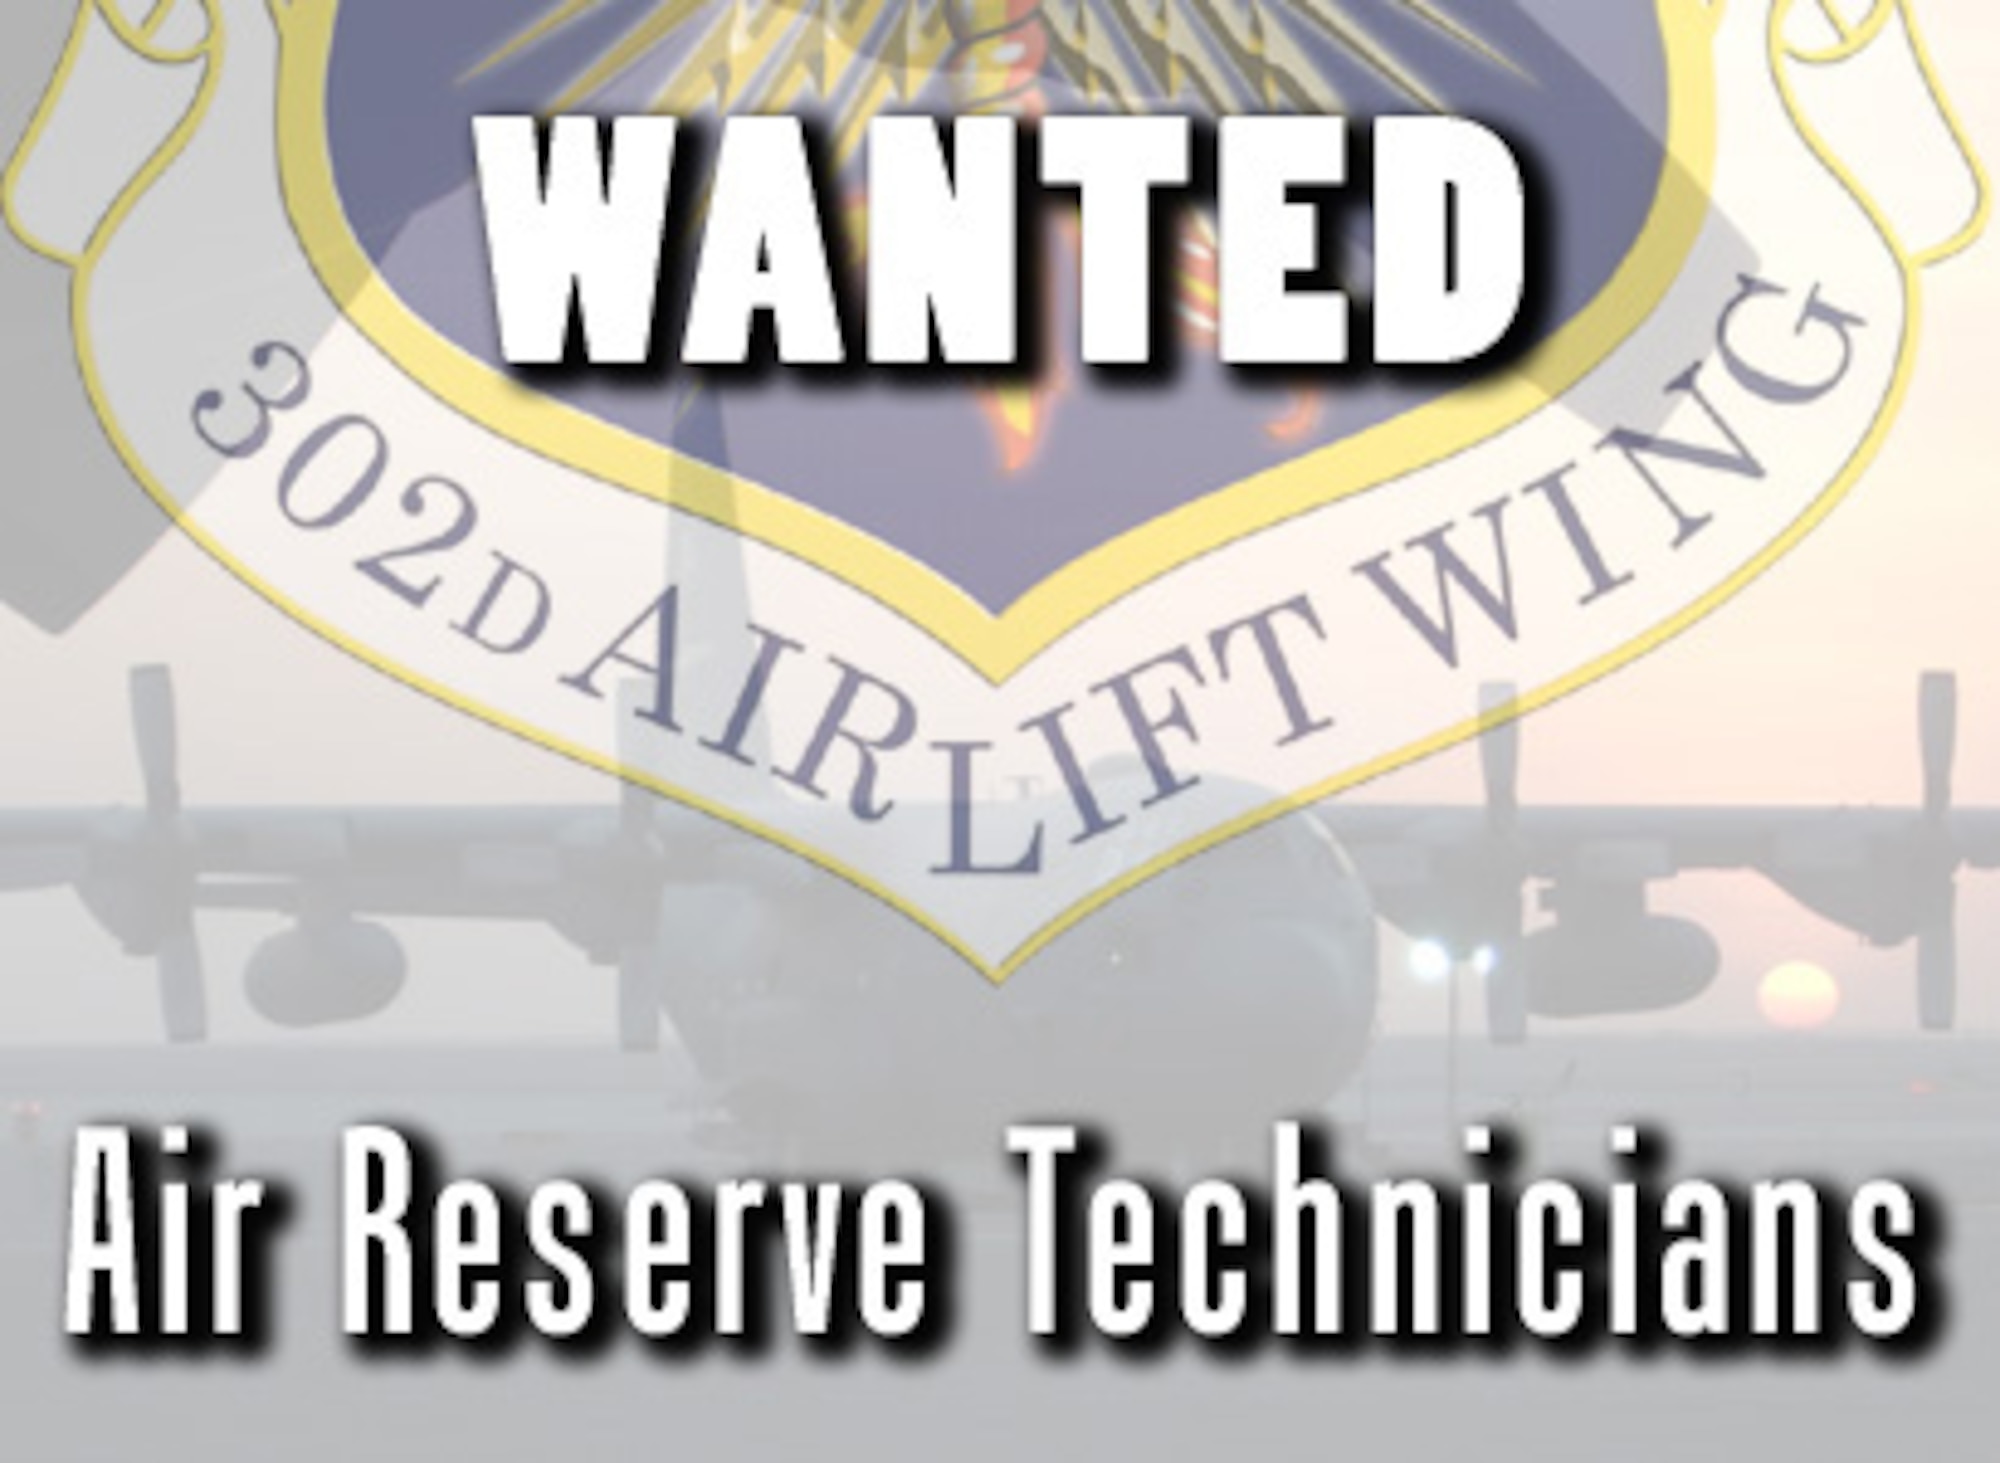 The 302nd Airlift Wing is looking for a few good ARTs! The 302nd AW, a member of the Air Force Reserve team, hires full-time Air Reserve Technicians, or 'ARTs,' to keep war-fighting organizations ready to deploy at a moment's notice. The ARTs range from day-to-day maintainers on the C-130 Hercules aircraft to pilots and navigators as well as support and medical personnel. Interested in the ART program? Visit www.afrc.af.mil/library/jobs/index.asp to learn more. (U.S. Air Force photo illustration/Staff Sgt. Stephen J. Collier)